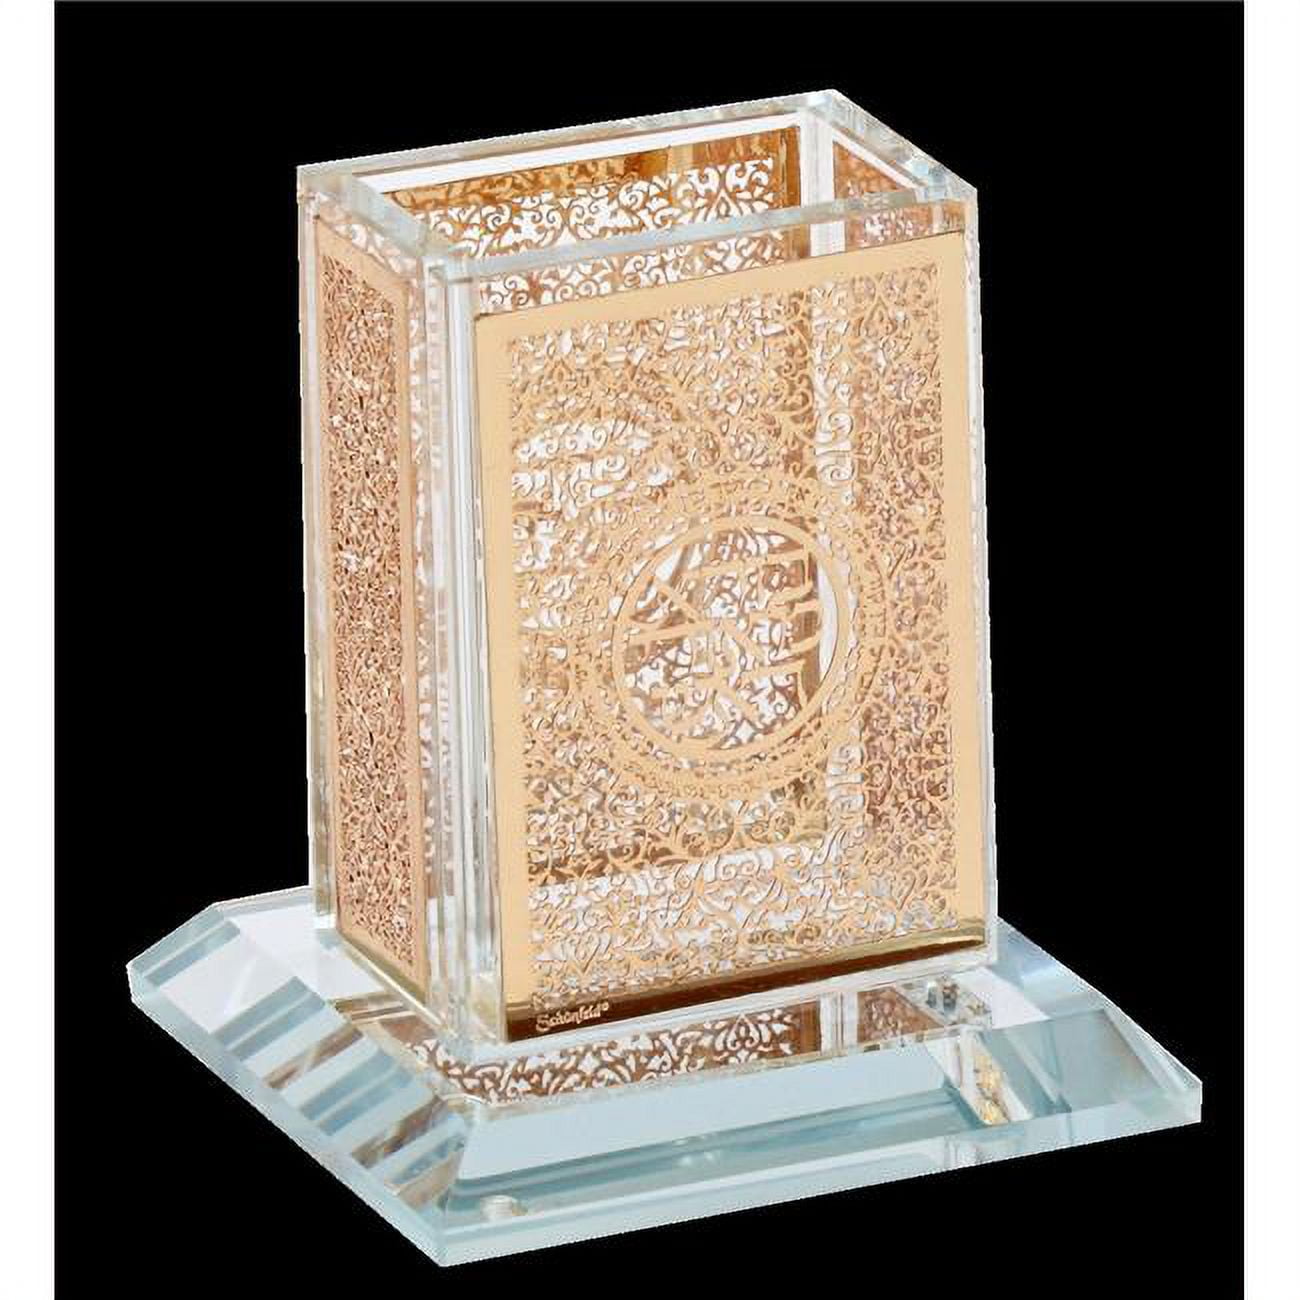 Picture of Schonfeld Collection 165316 3 x 3.5 in. Crystal Havdalah Holder with Silver Plate